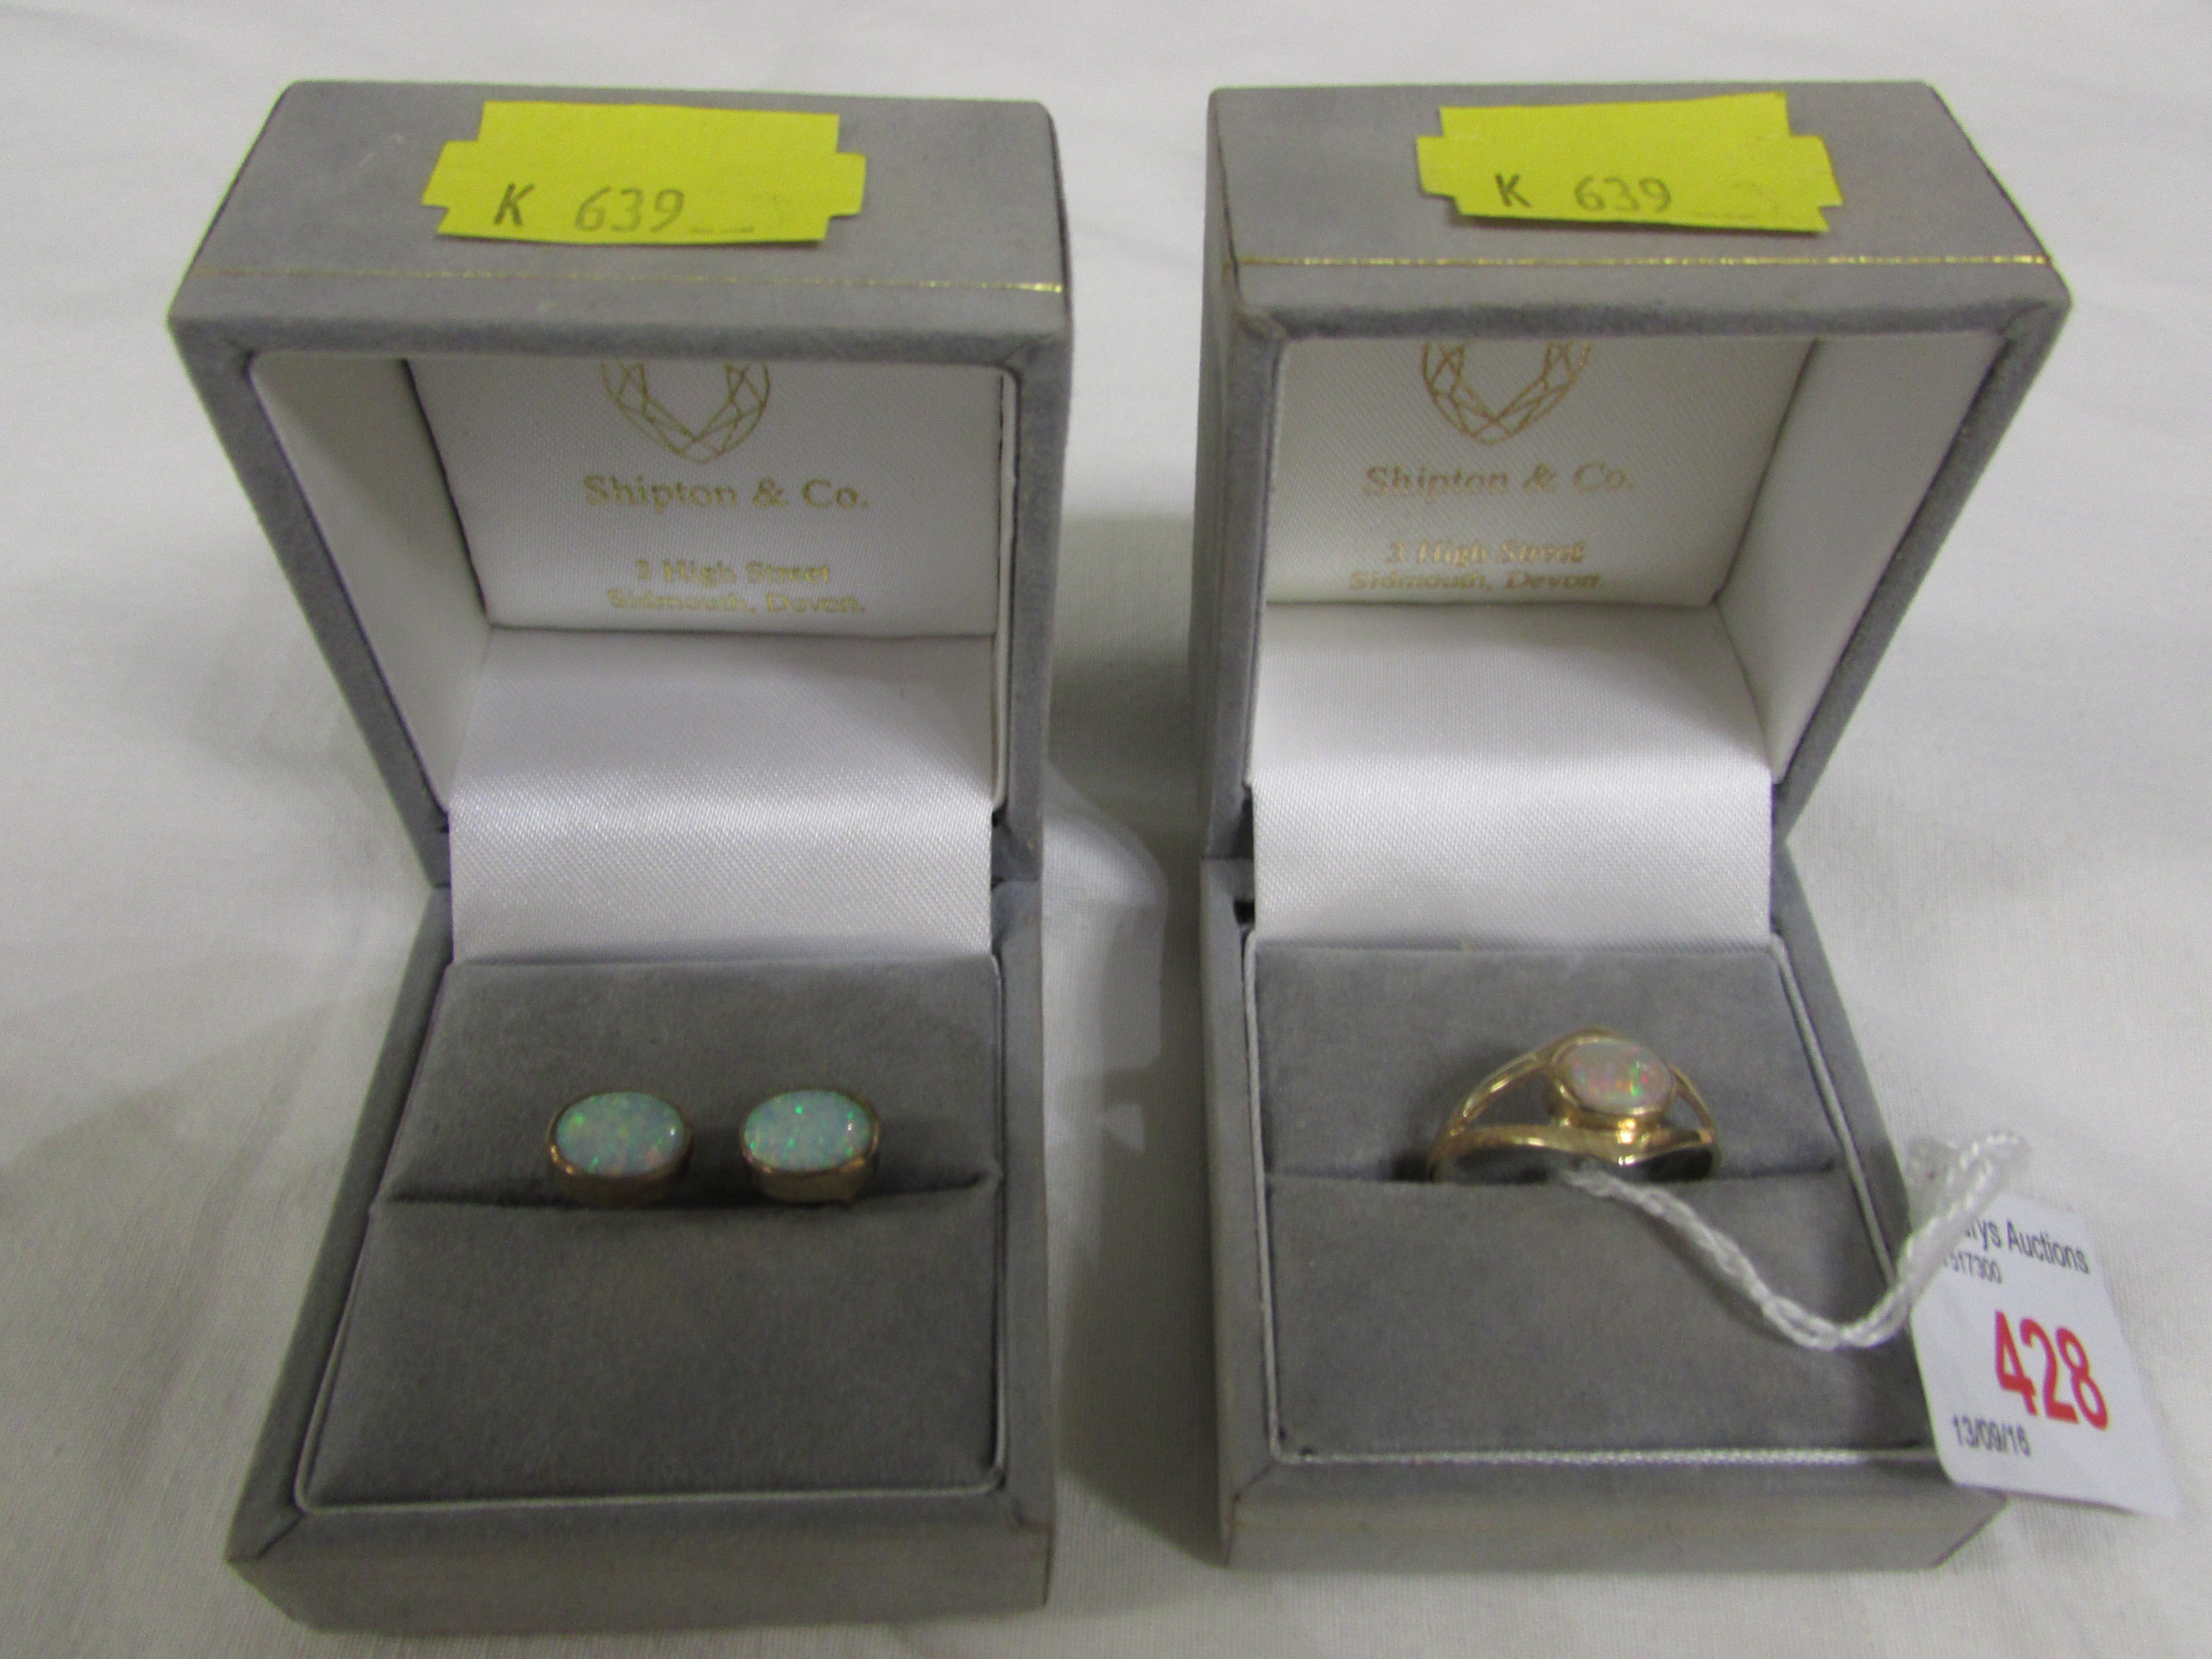 9-CARAT GOLD RING SET WITH OPAL (7MM x 5MM APPROXIMATELY) AND MATCHING YELLOW METAL EARRINGS, EACH